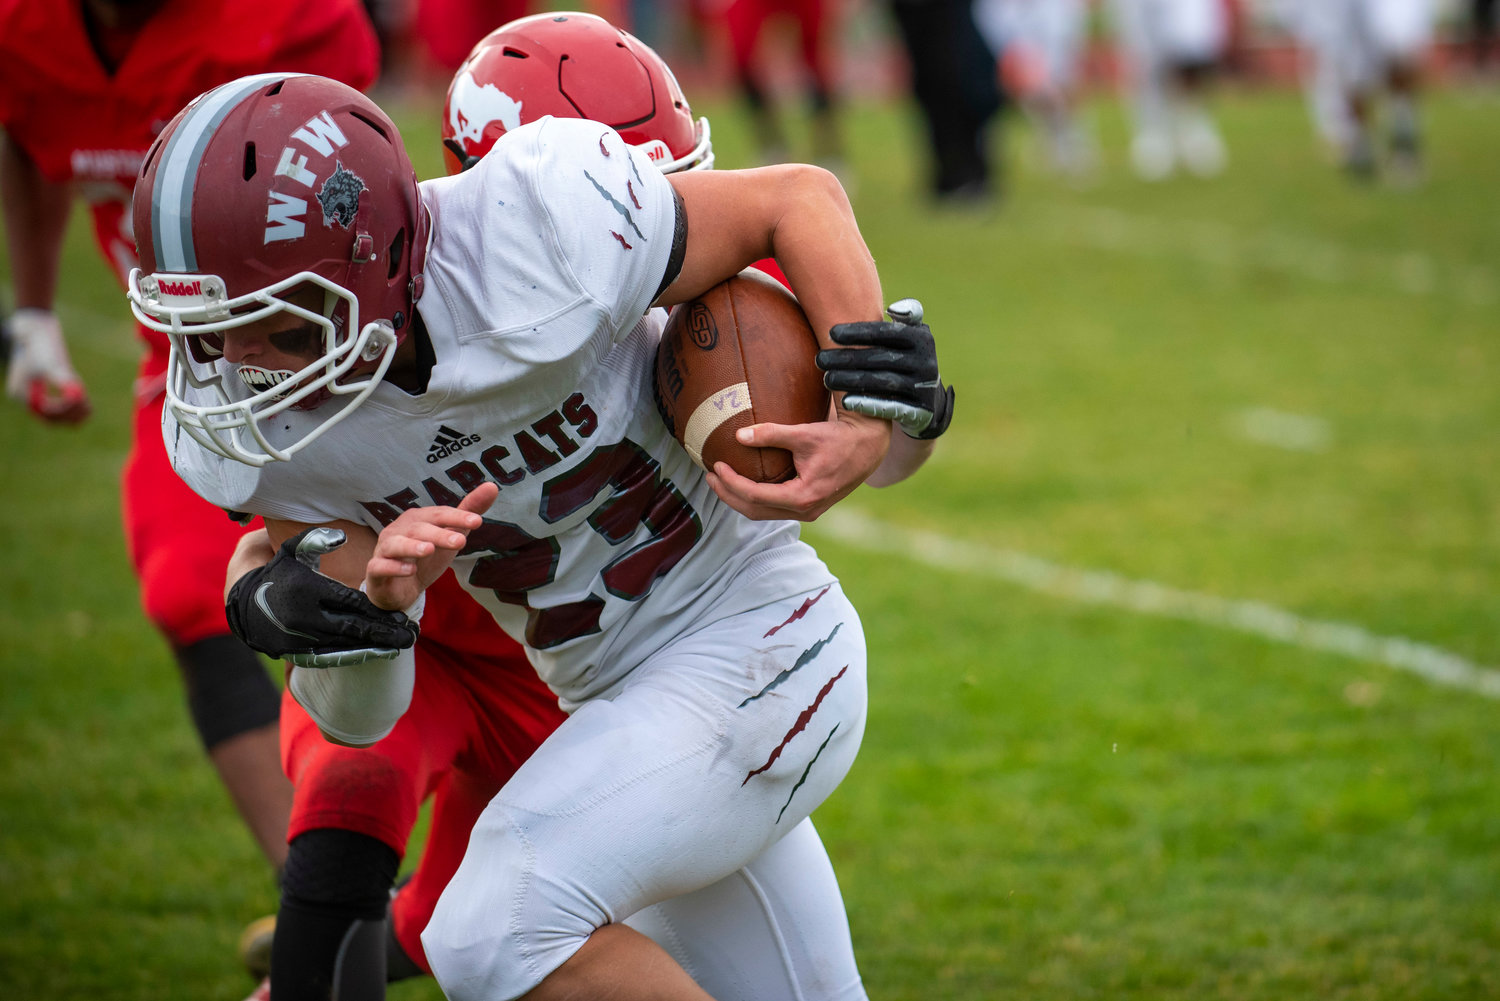 W.F. West’s Evan Stajduhar (23) runs after catching a pass against Prosser on Saturday.